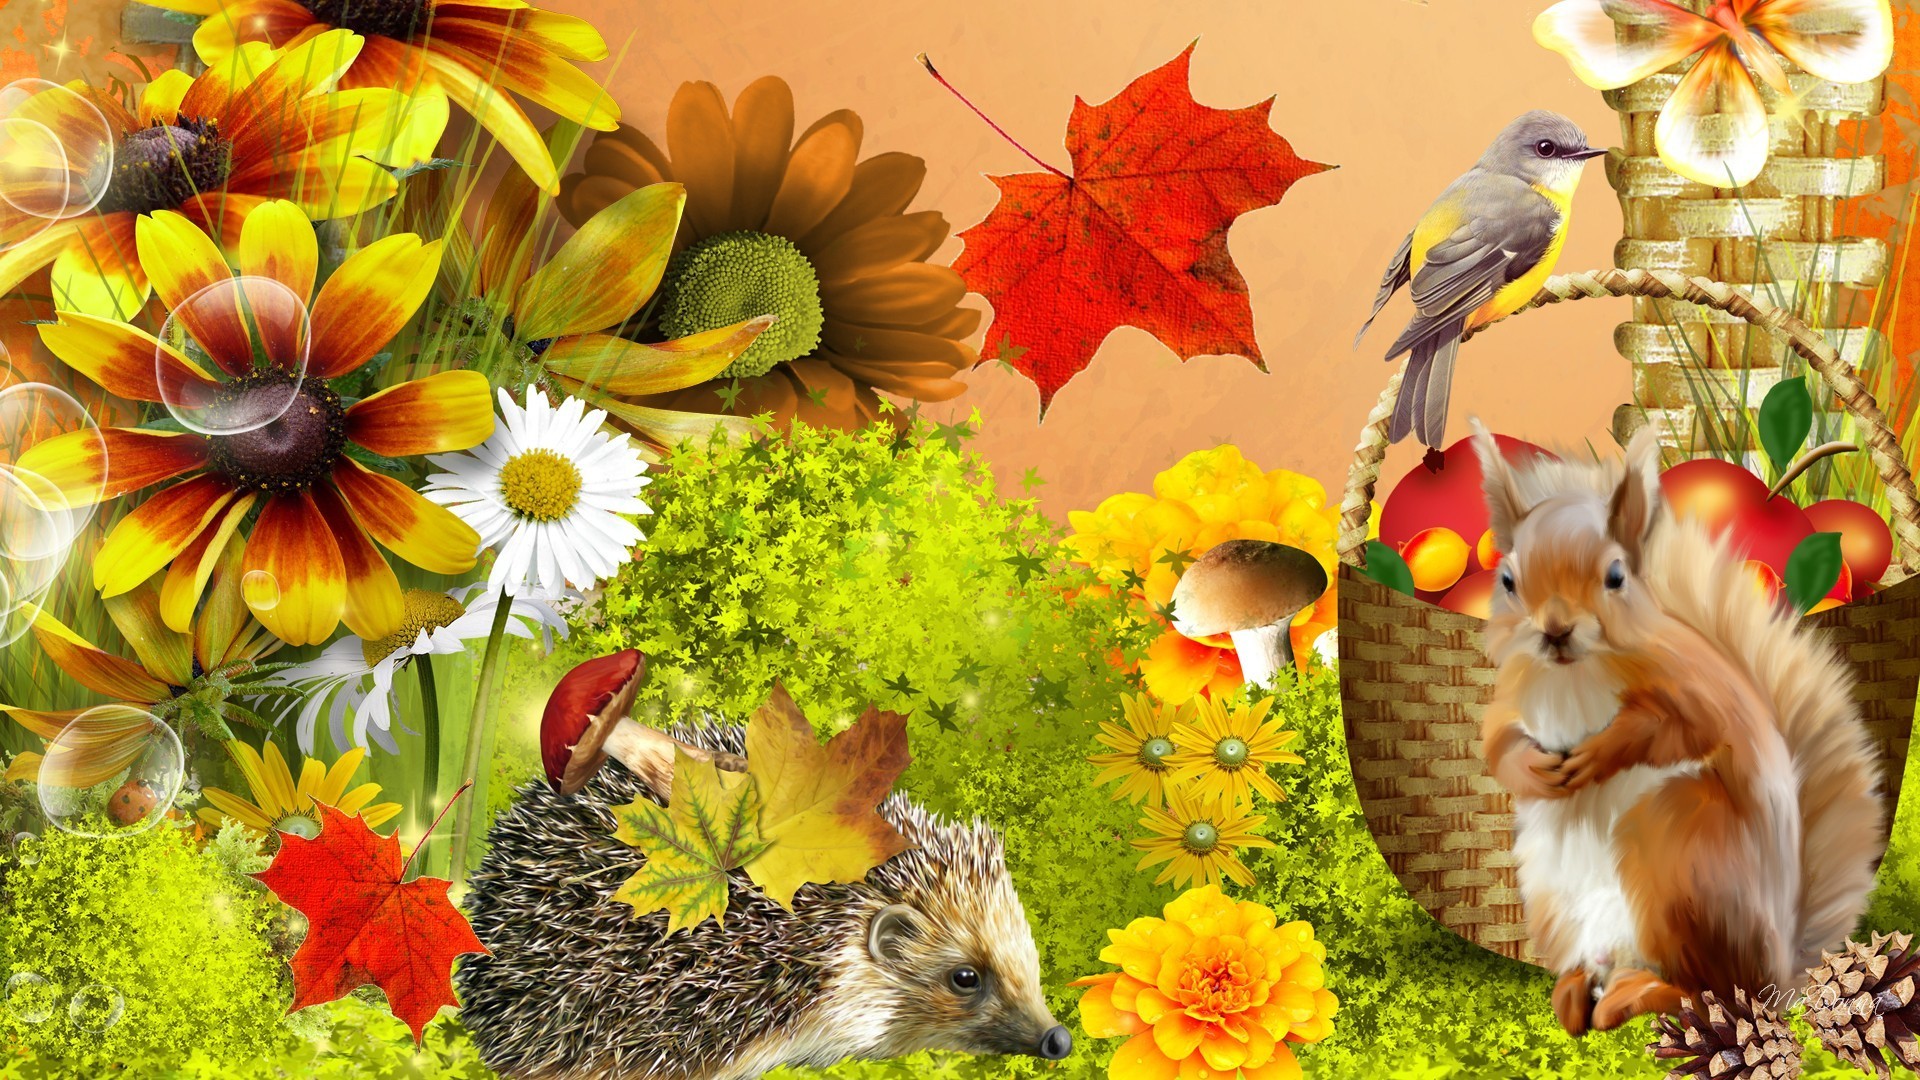 1920x1080 Ivy Tag - Autumn Flowers Fruit Squirrel Ivy Mushrooms Fall Bird Apples  Porcupine Fleurs Nuts Whimsical